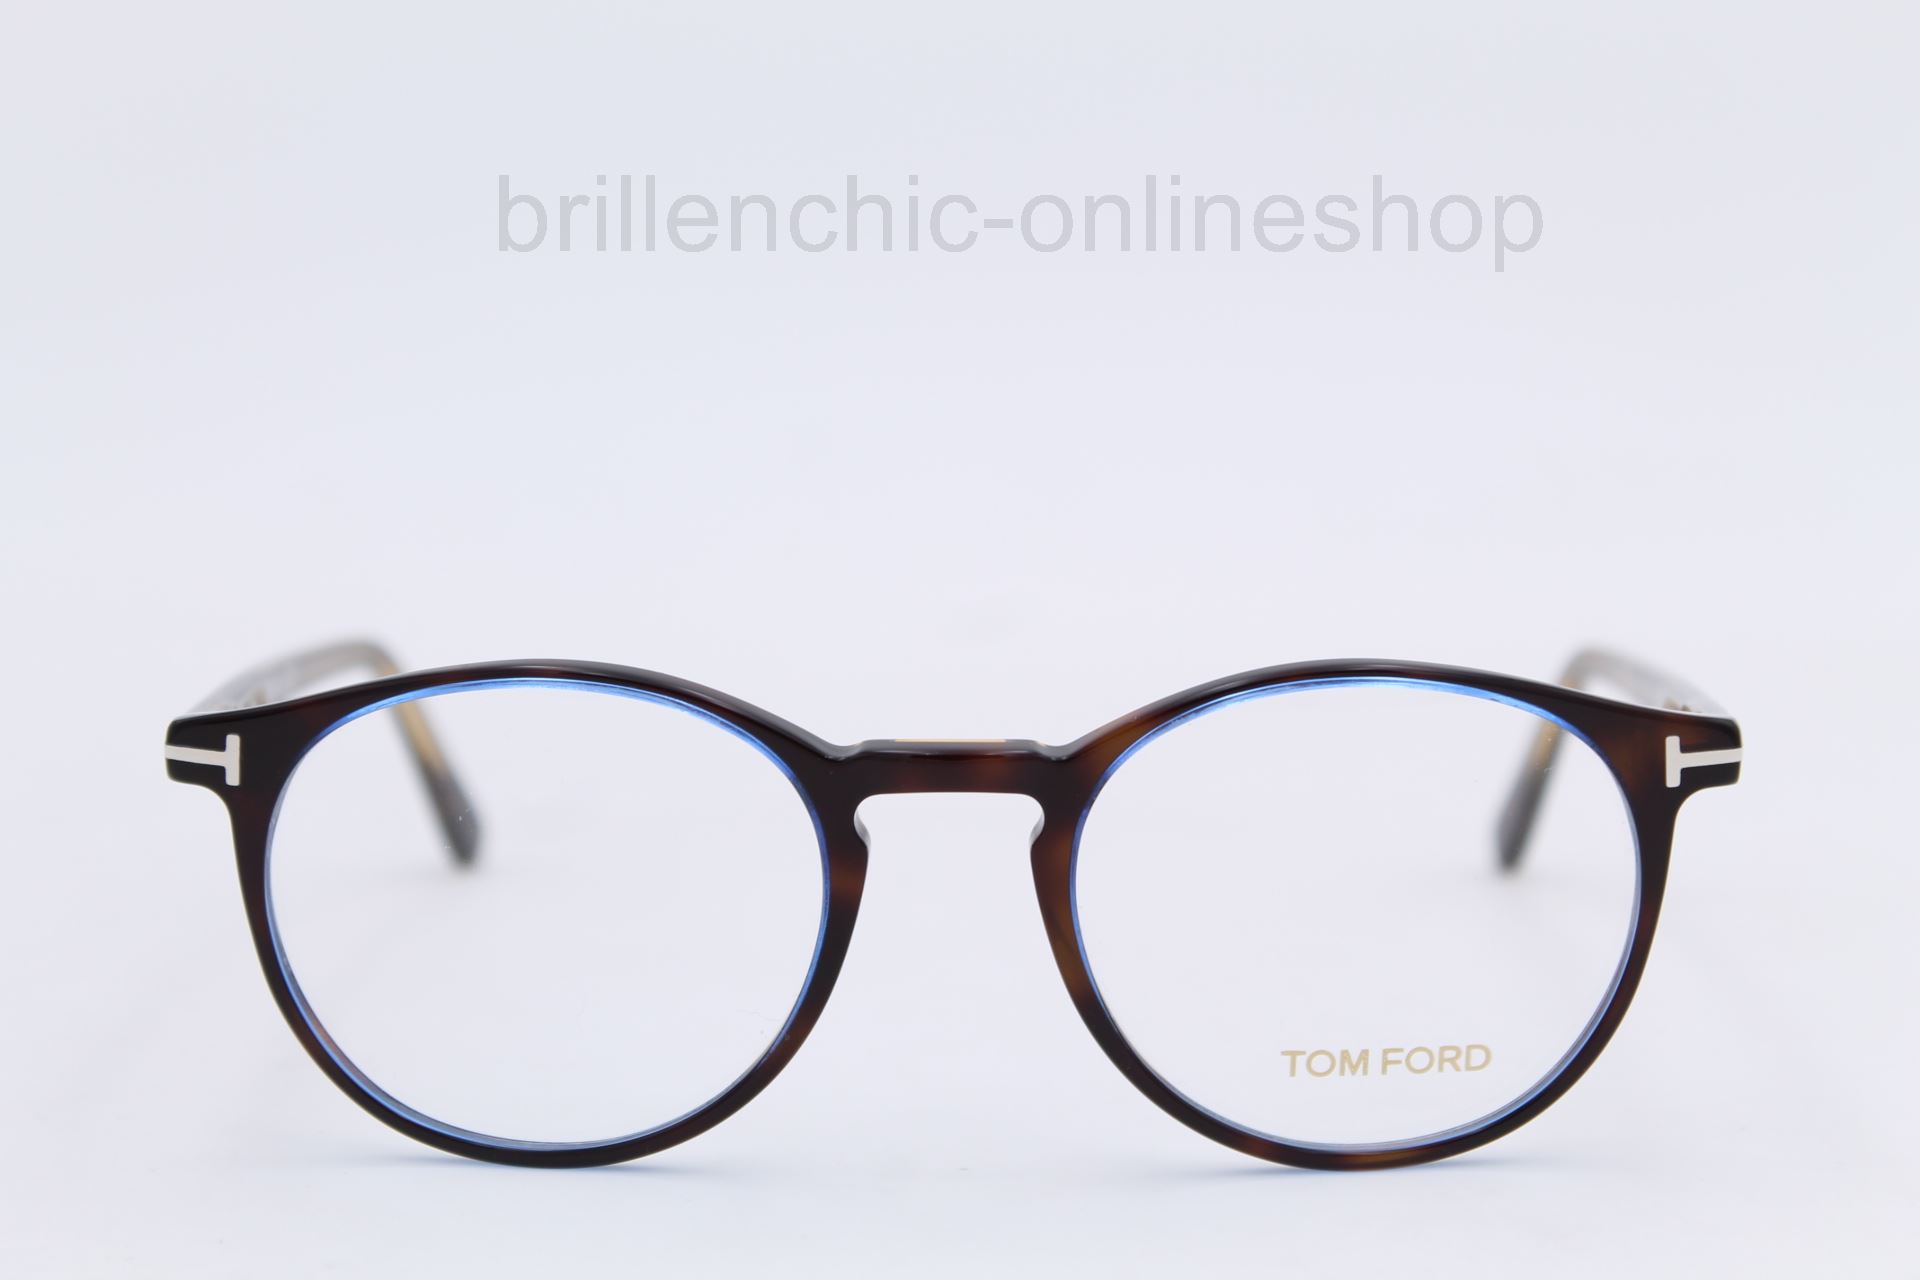 Brillenchic-onlineshop in Berlin - TOM FORD TF 5294 056 